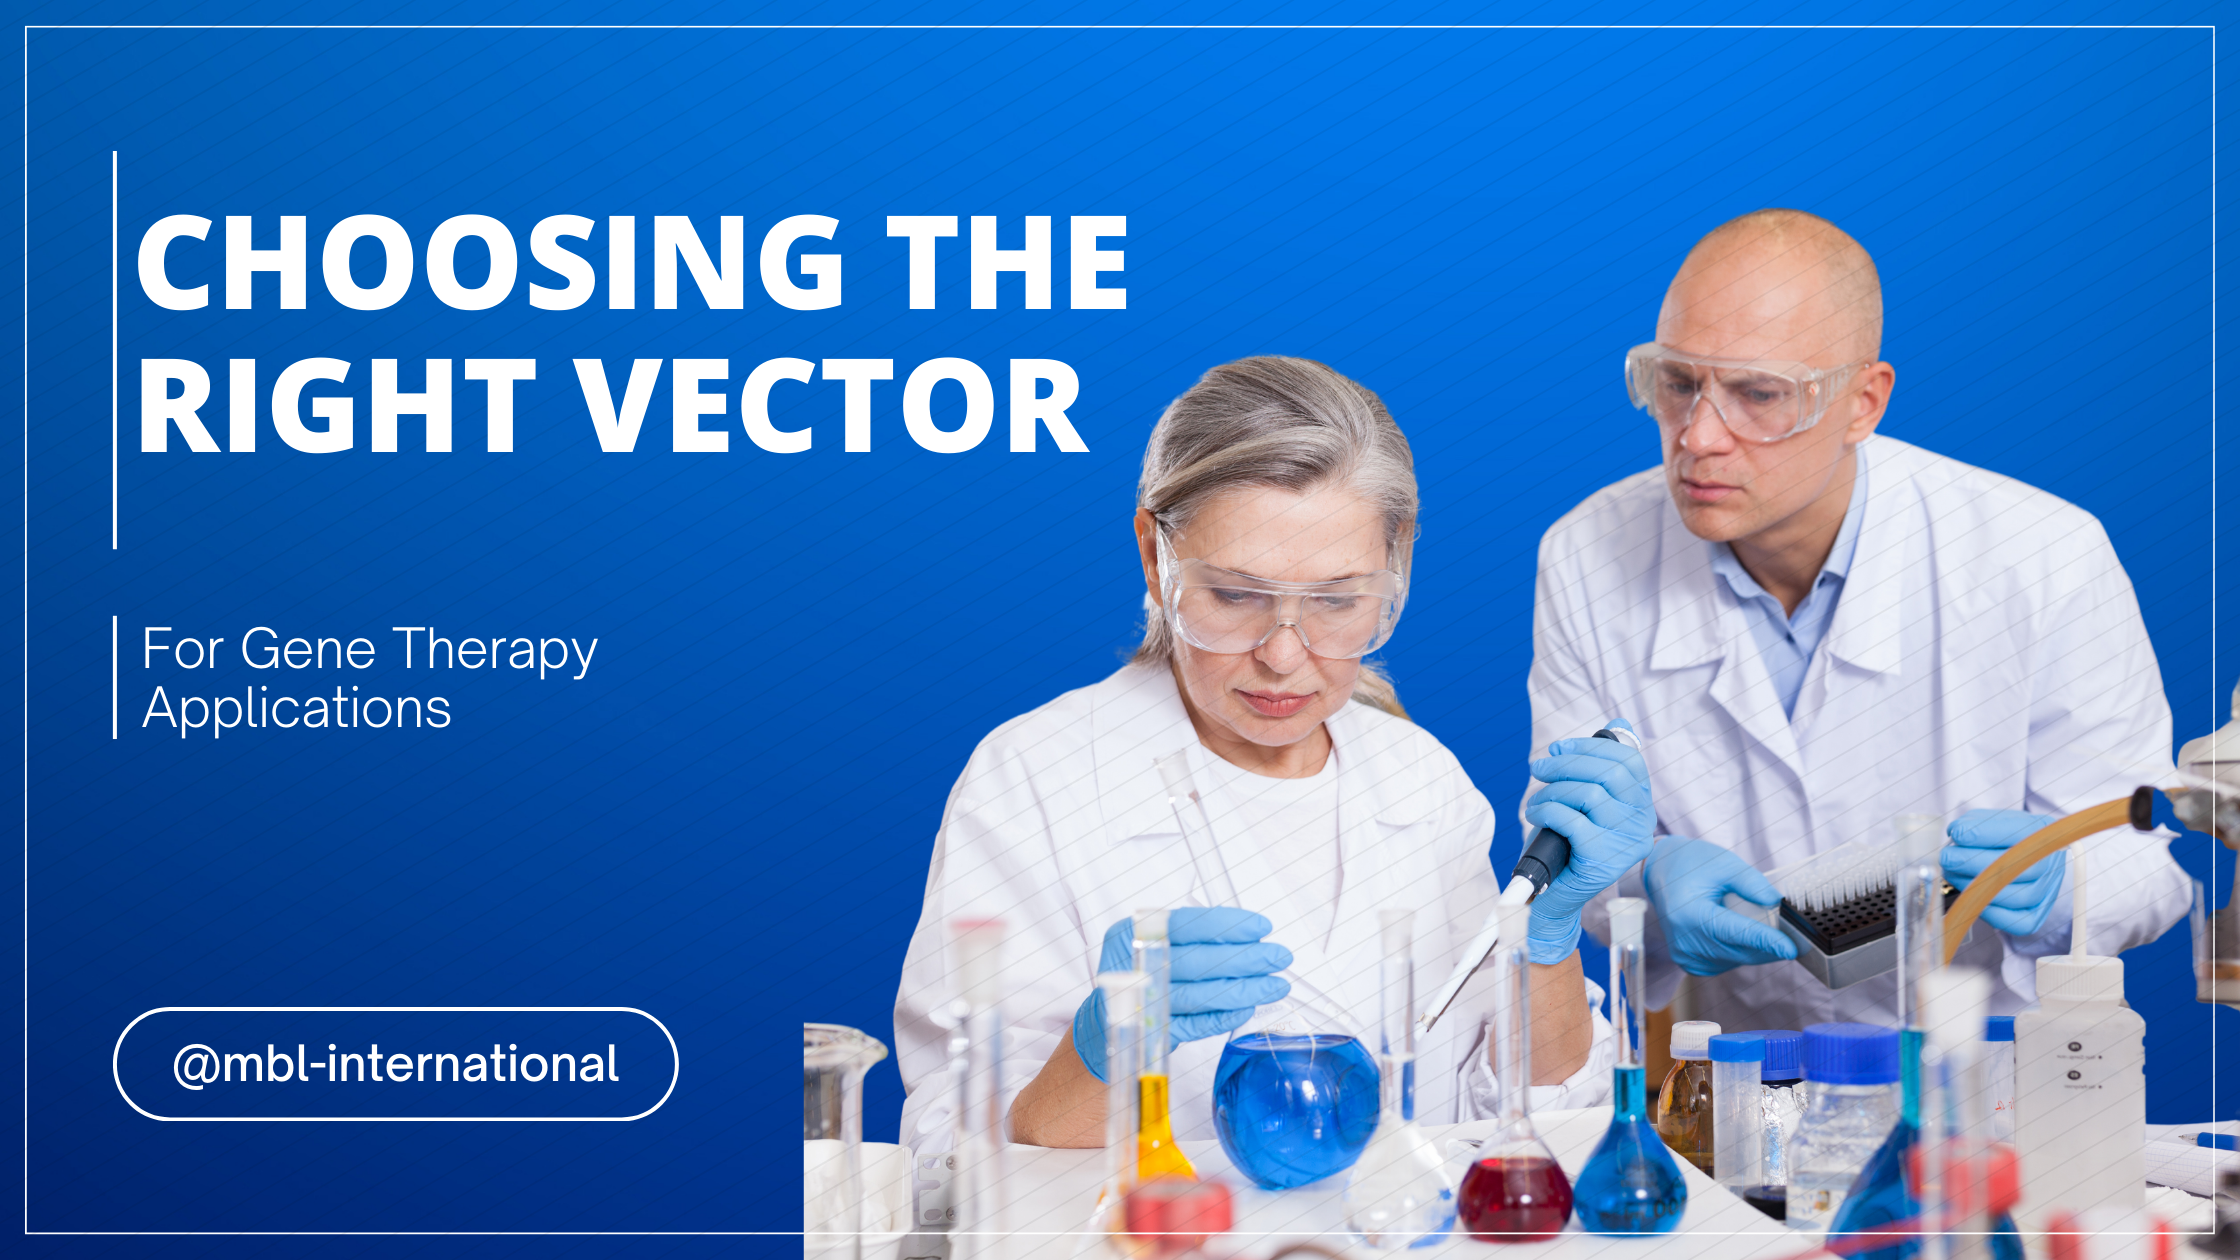 Choosing the Right Vector for Gene Therapy Applications